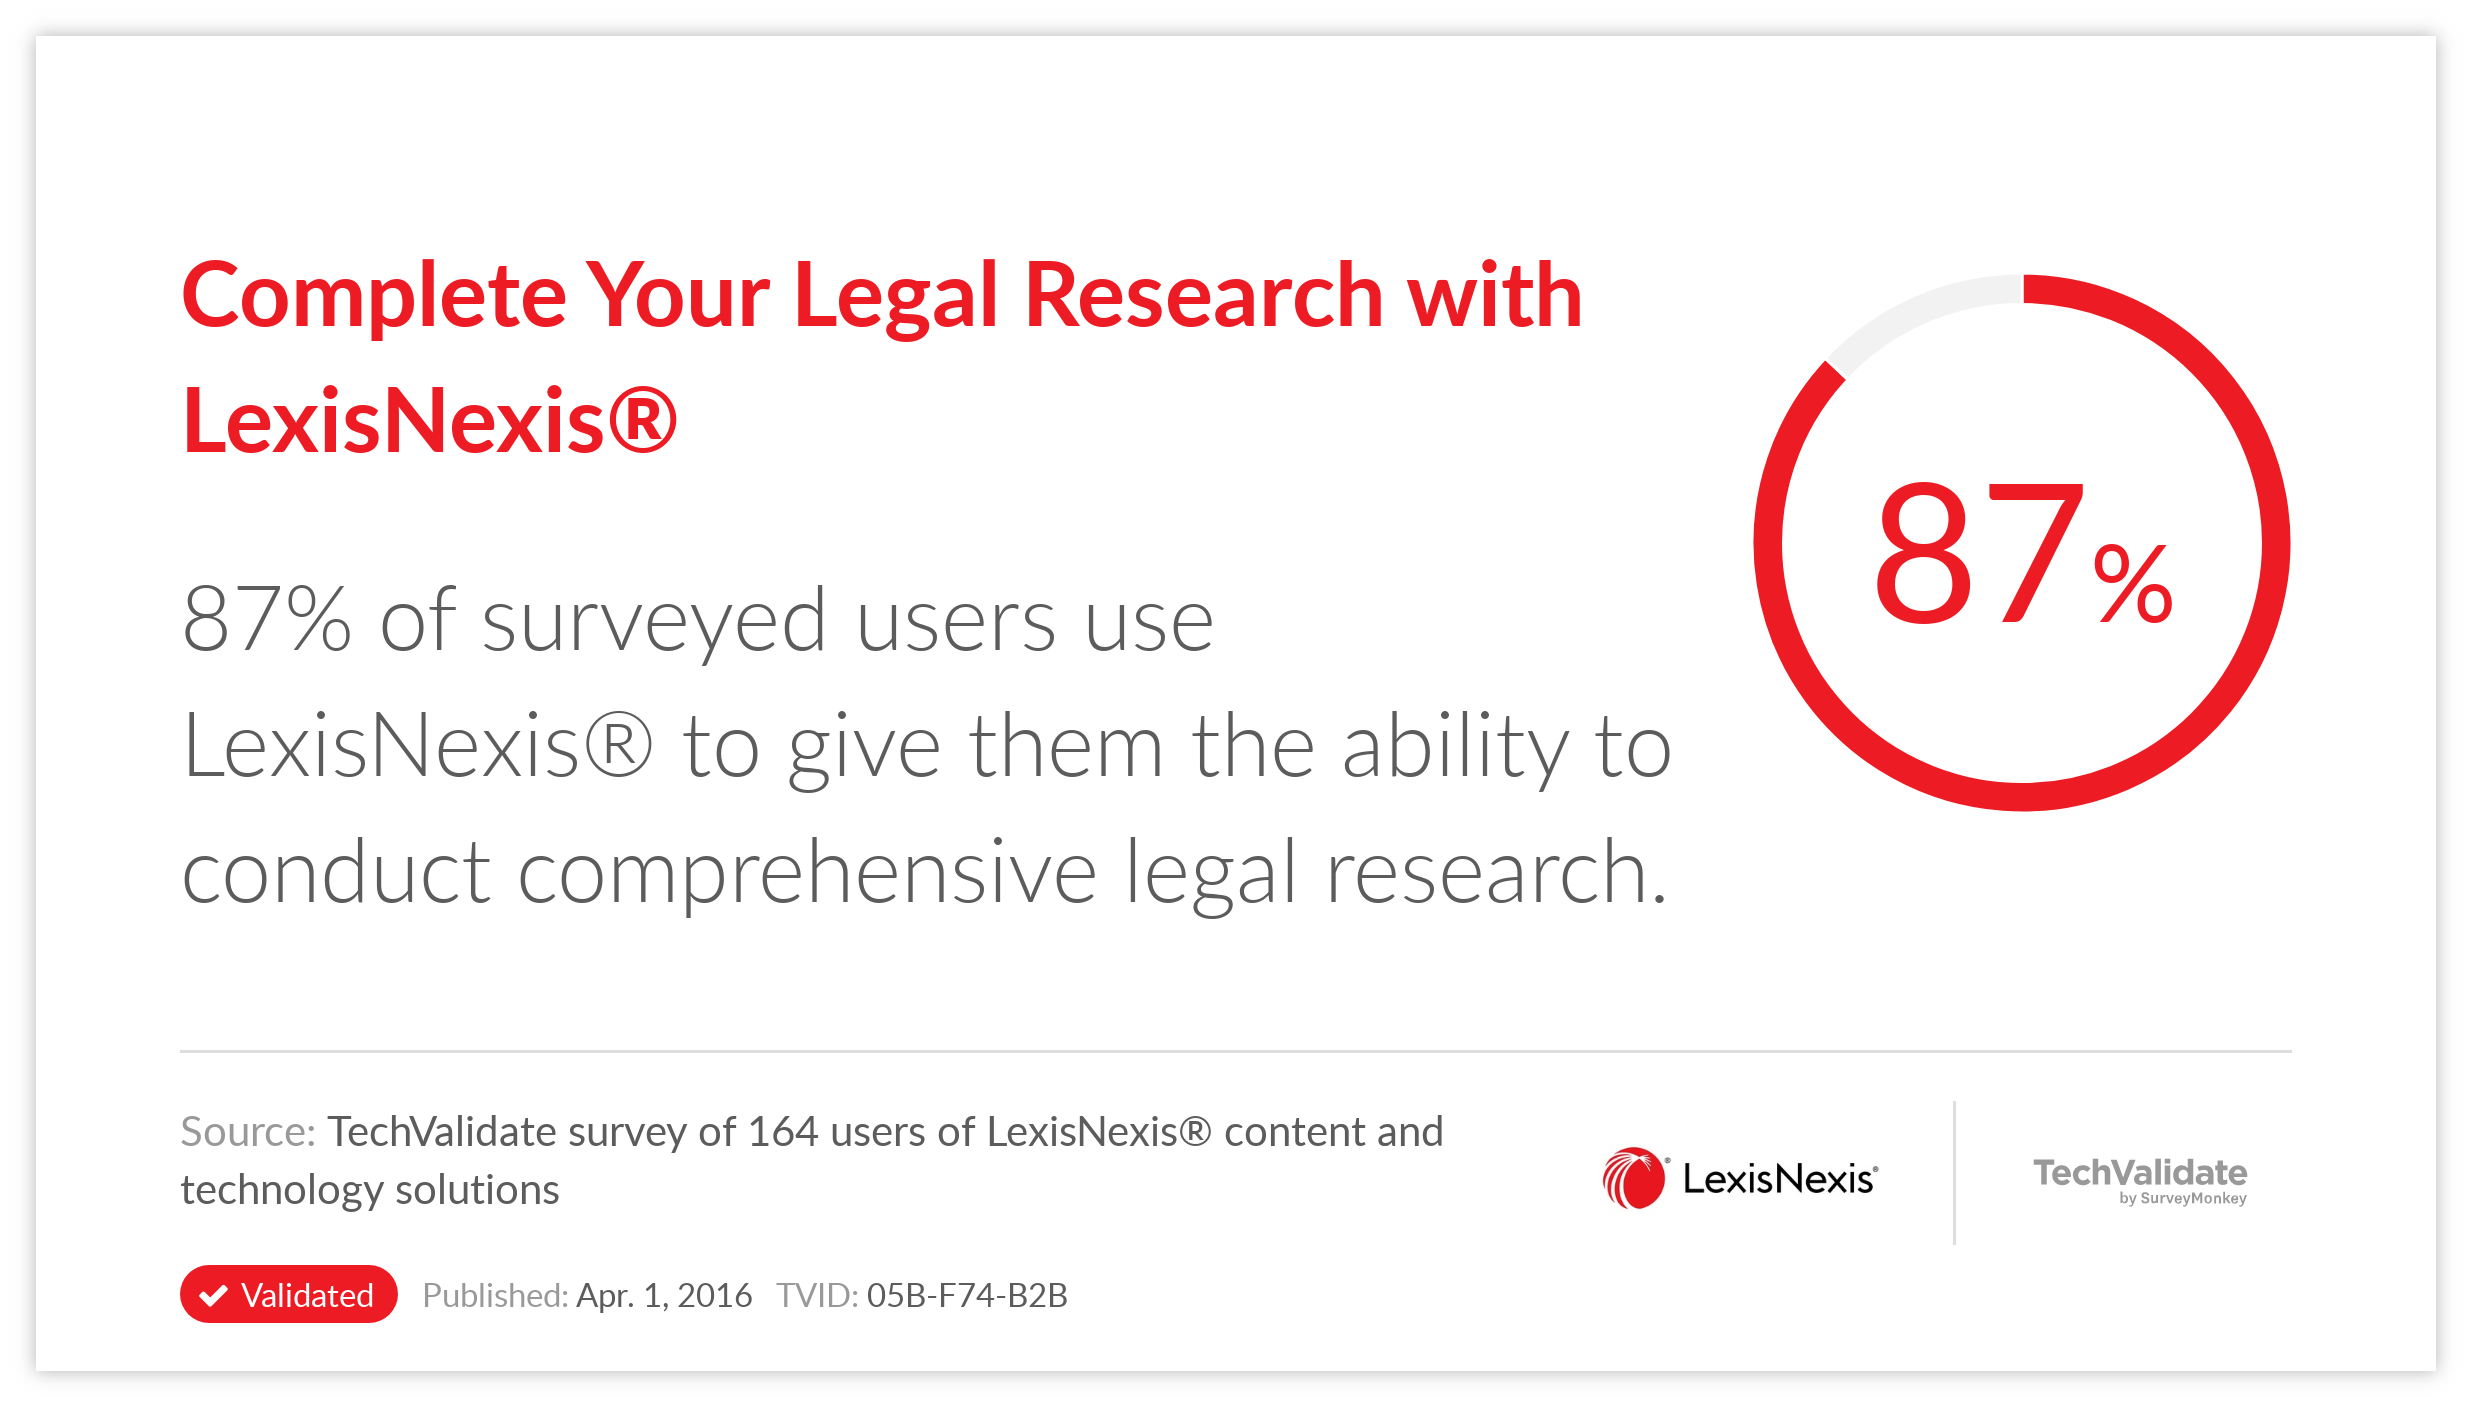 Complete Your Legal Research with LexisNexis®